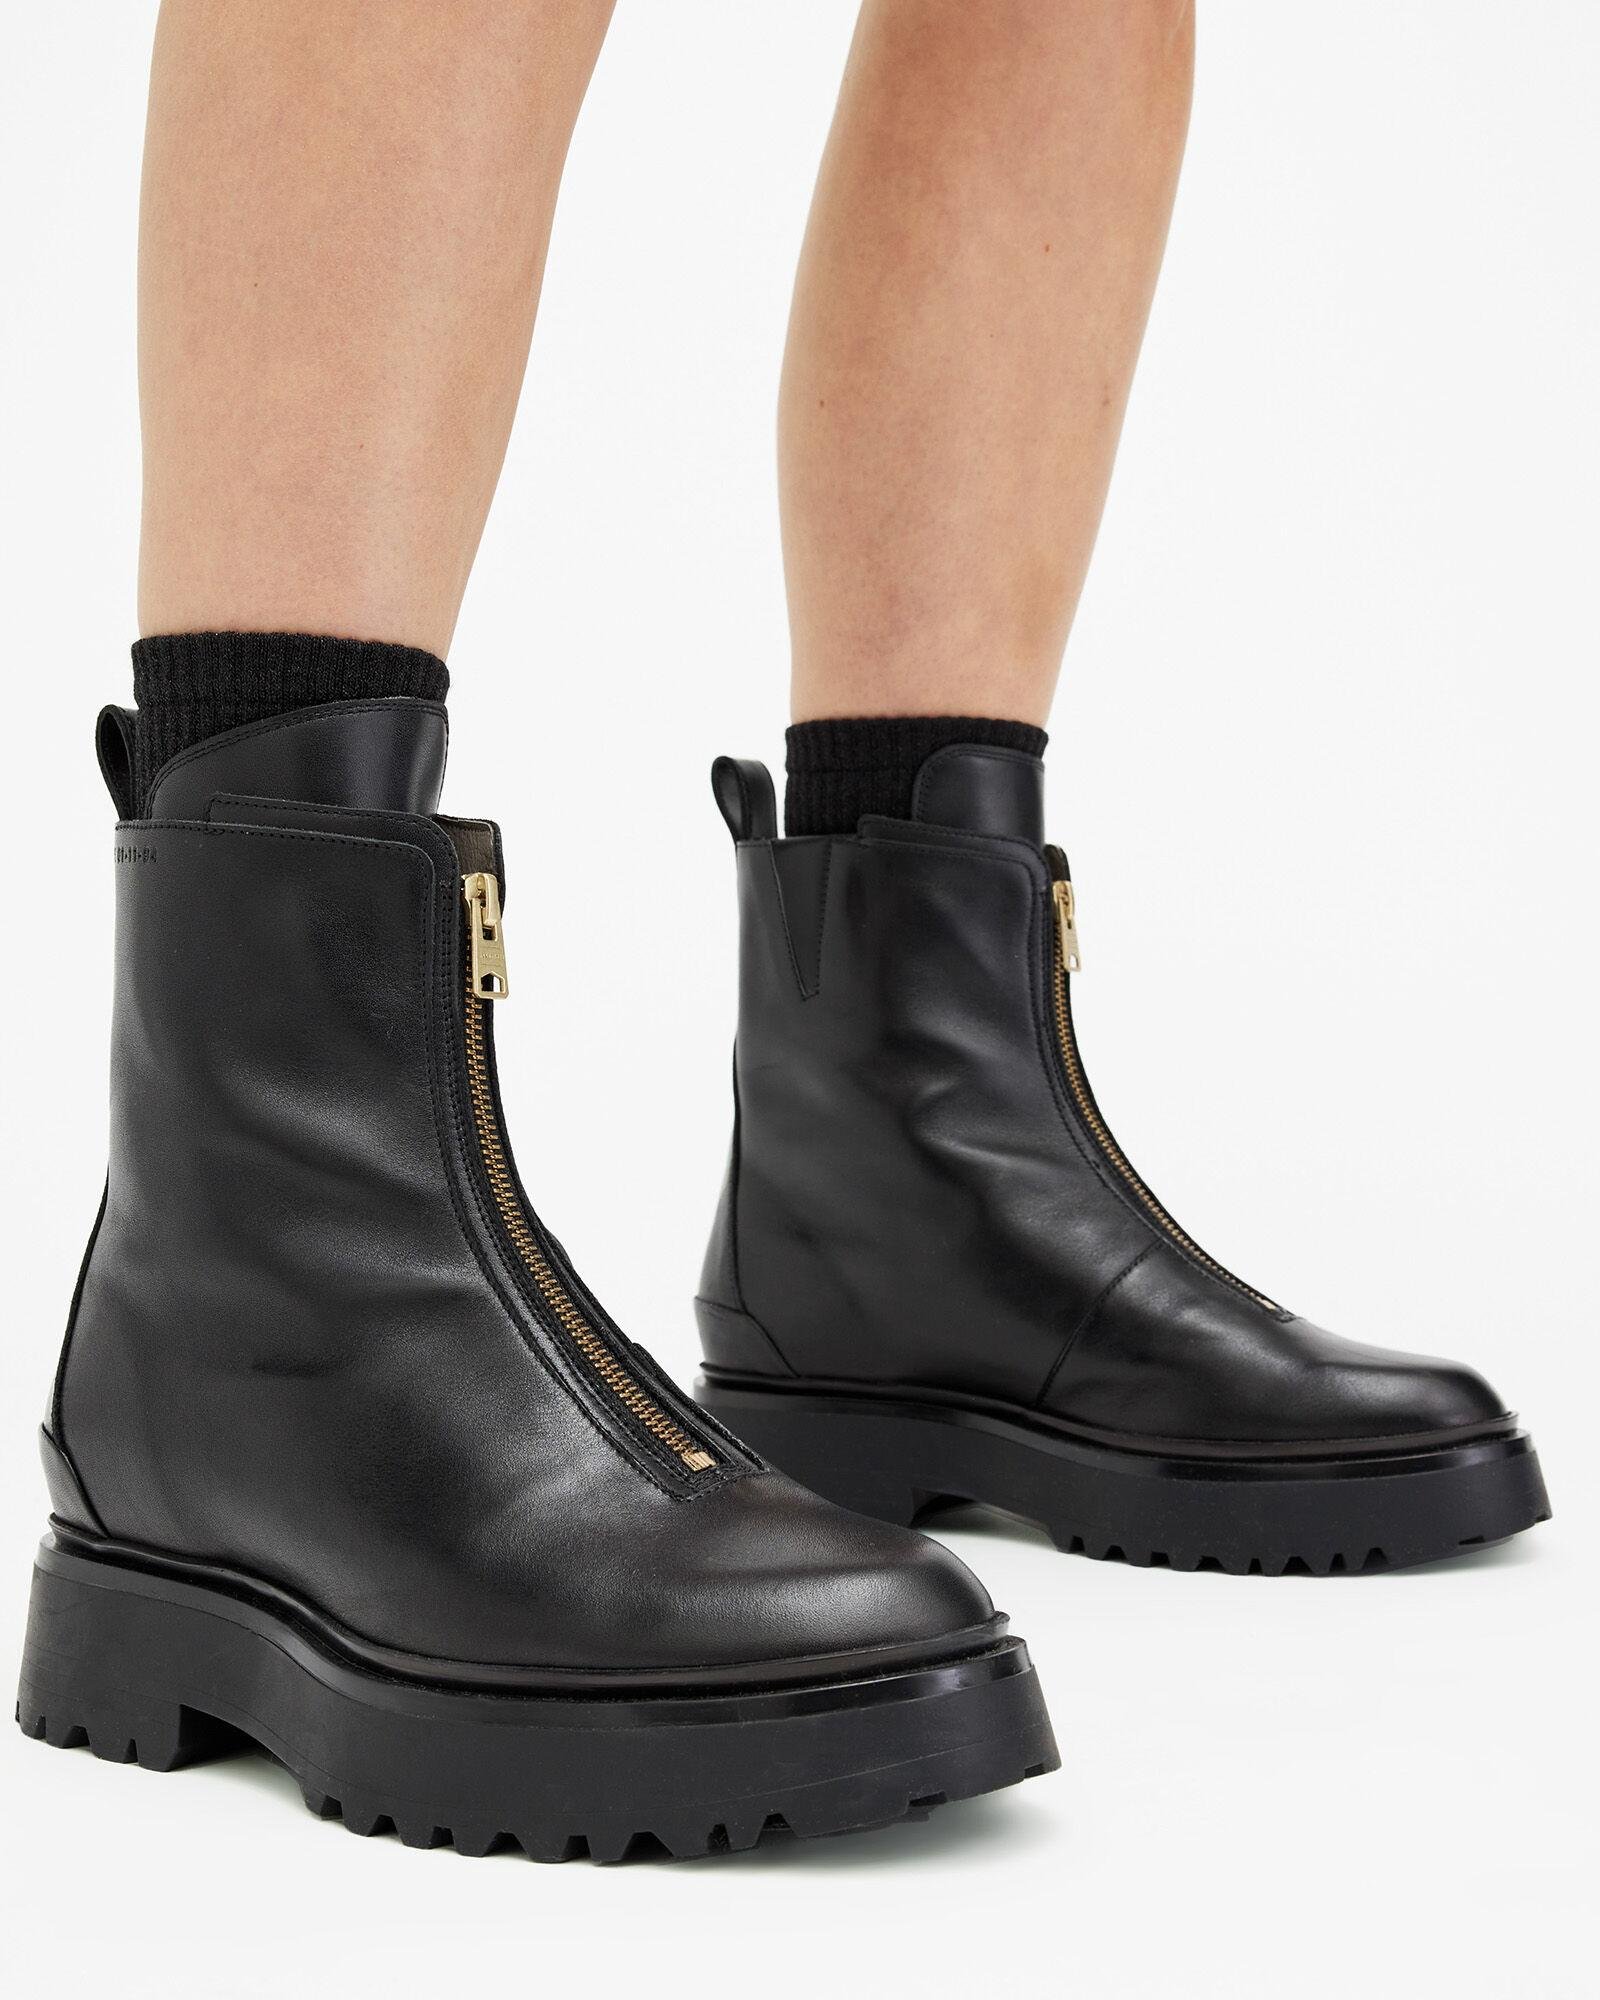 Ophelia Chunky Leather Chelsea Boots by ALLSAINTS